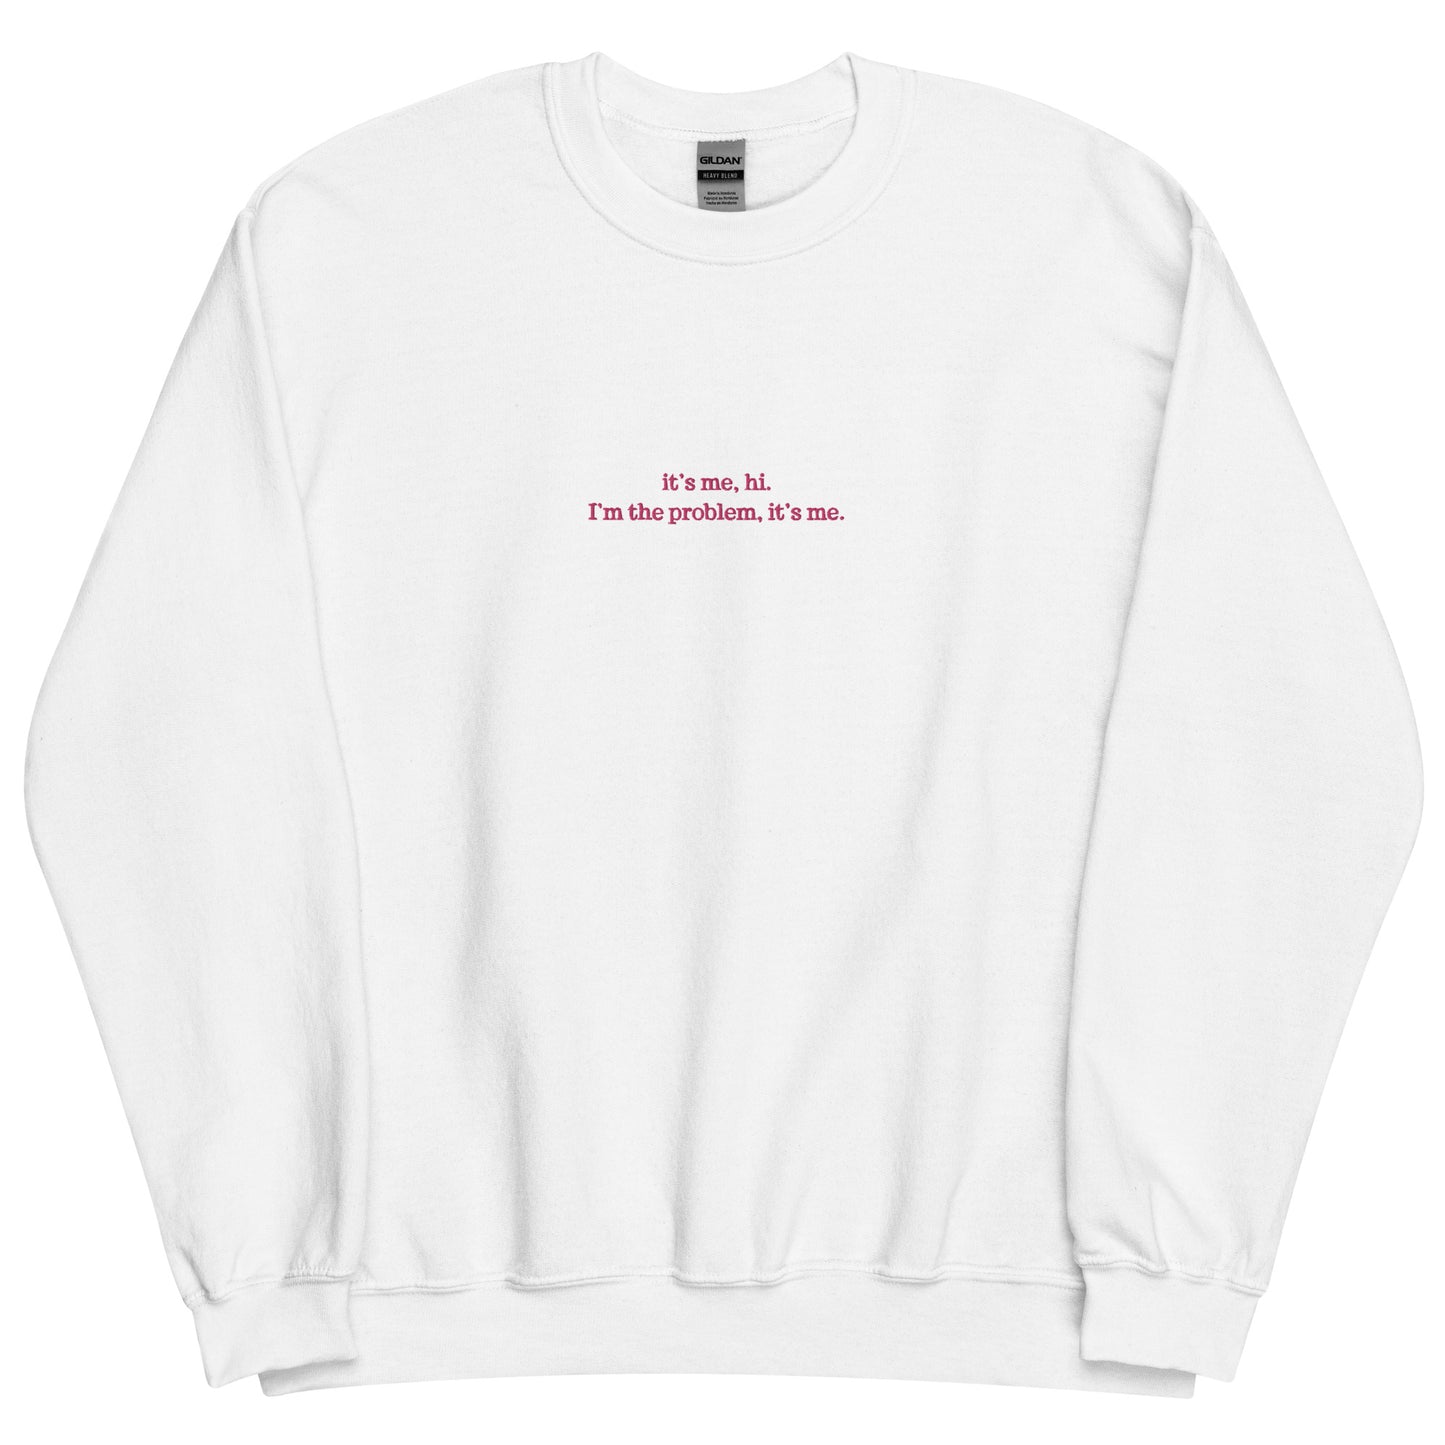 it’s me, hi. - Embroidered Crew Sweatshirt (pink or white)